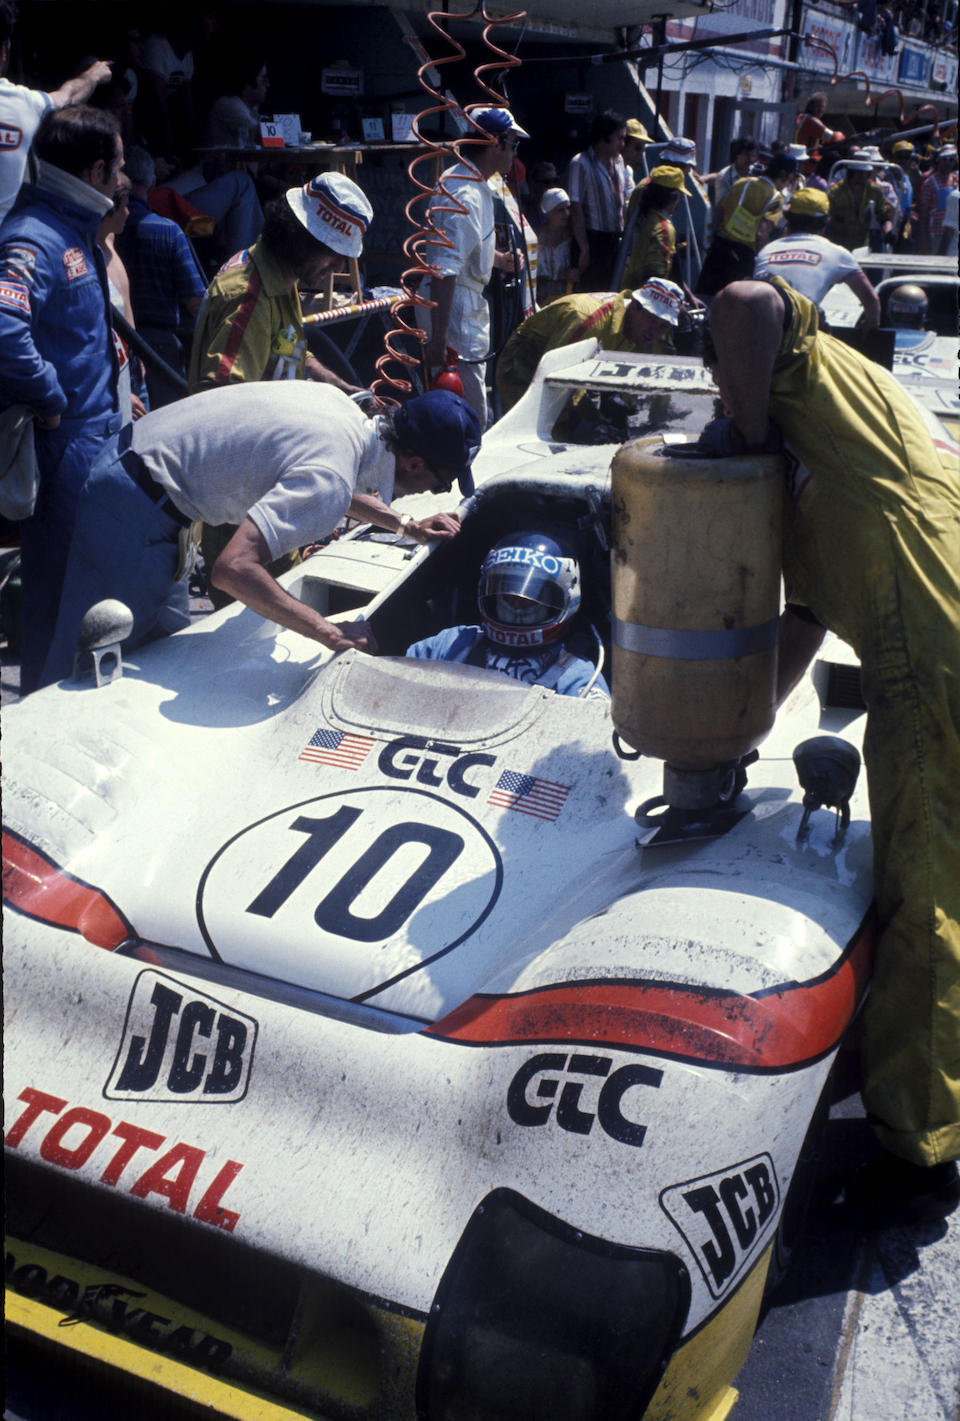 The Ex-Vern Schuppan/Jean-Pierre Jaussaud, Jean-Louis Lafosse/Francois Migault &#150; Le Mans 3rd place 1975 &#150; 2nd place 1976,1974-75 Gulf Mirage-Cosworth GR8 Endurance Racing Sports-Prototype  Chassis no. 802 Engine no. DFV 941